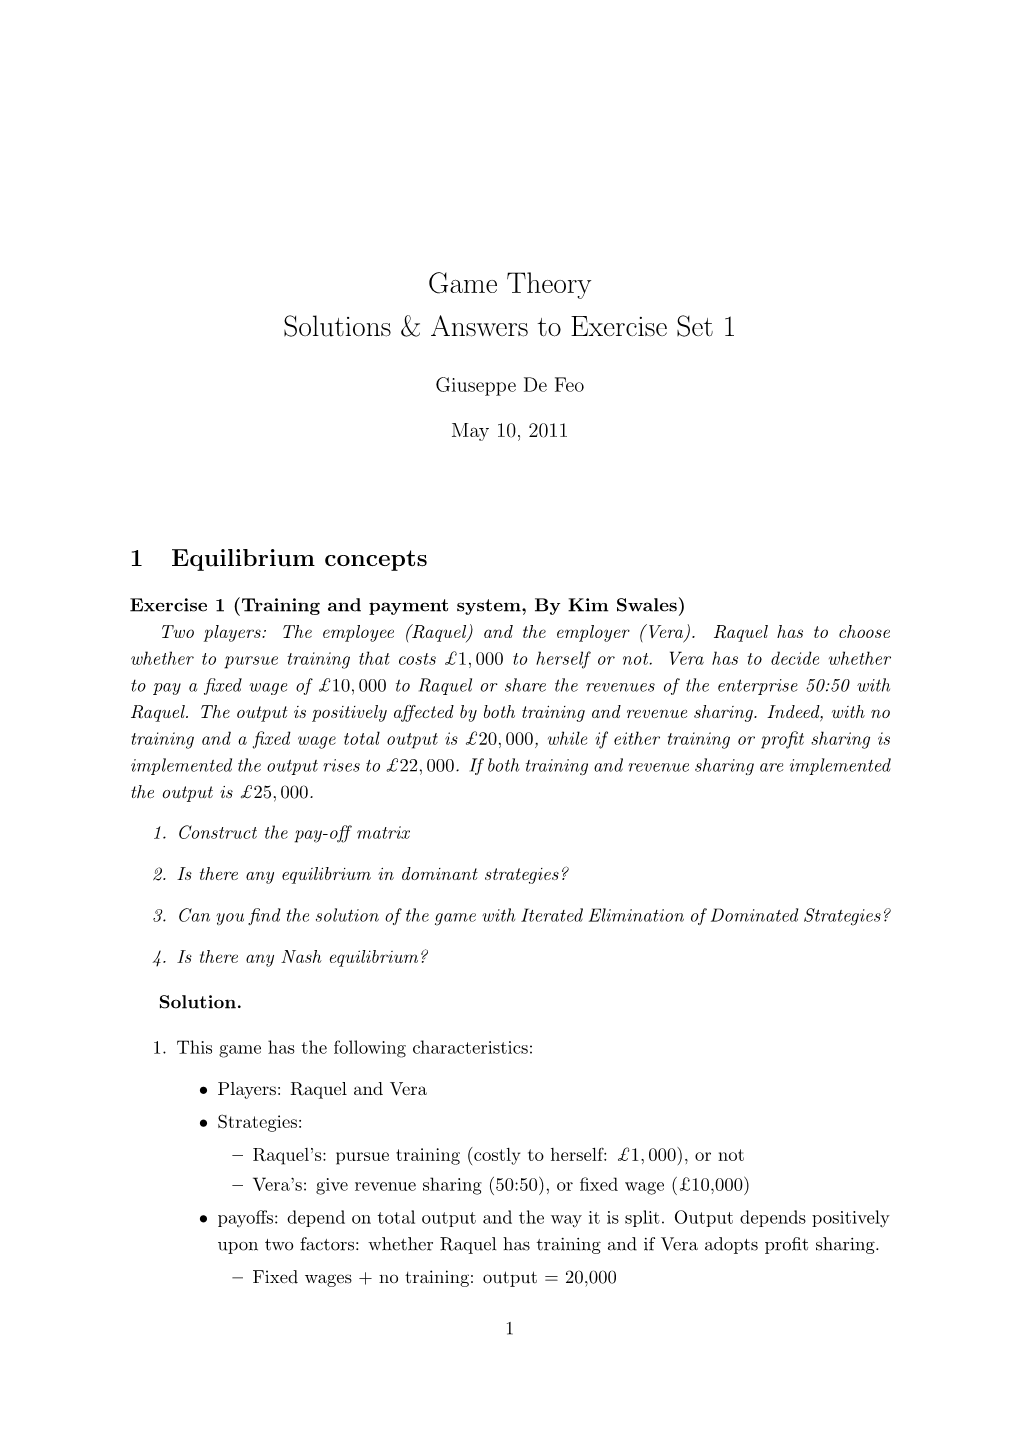 Game Theory Solutions & Answers to Exercise Set 1